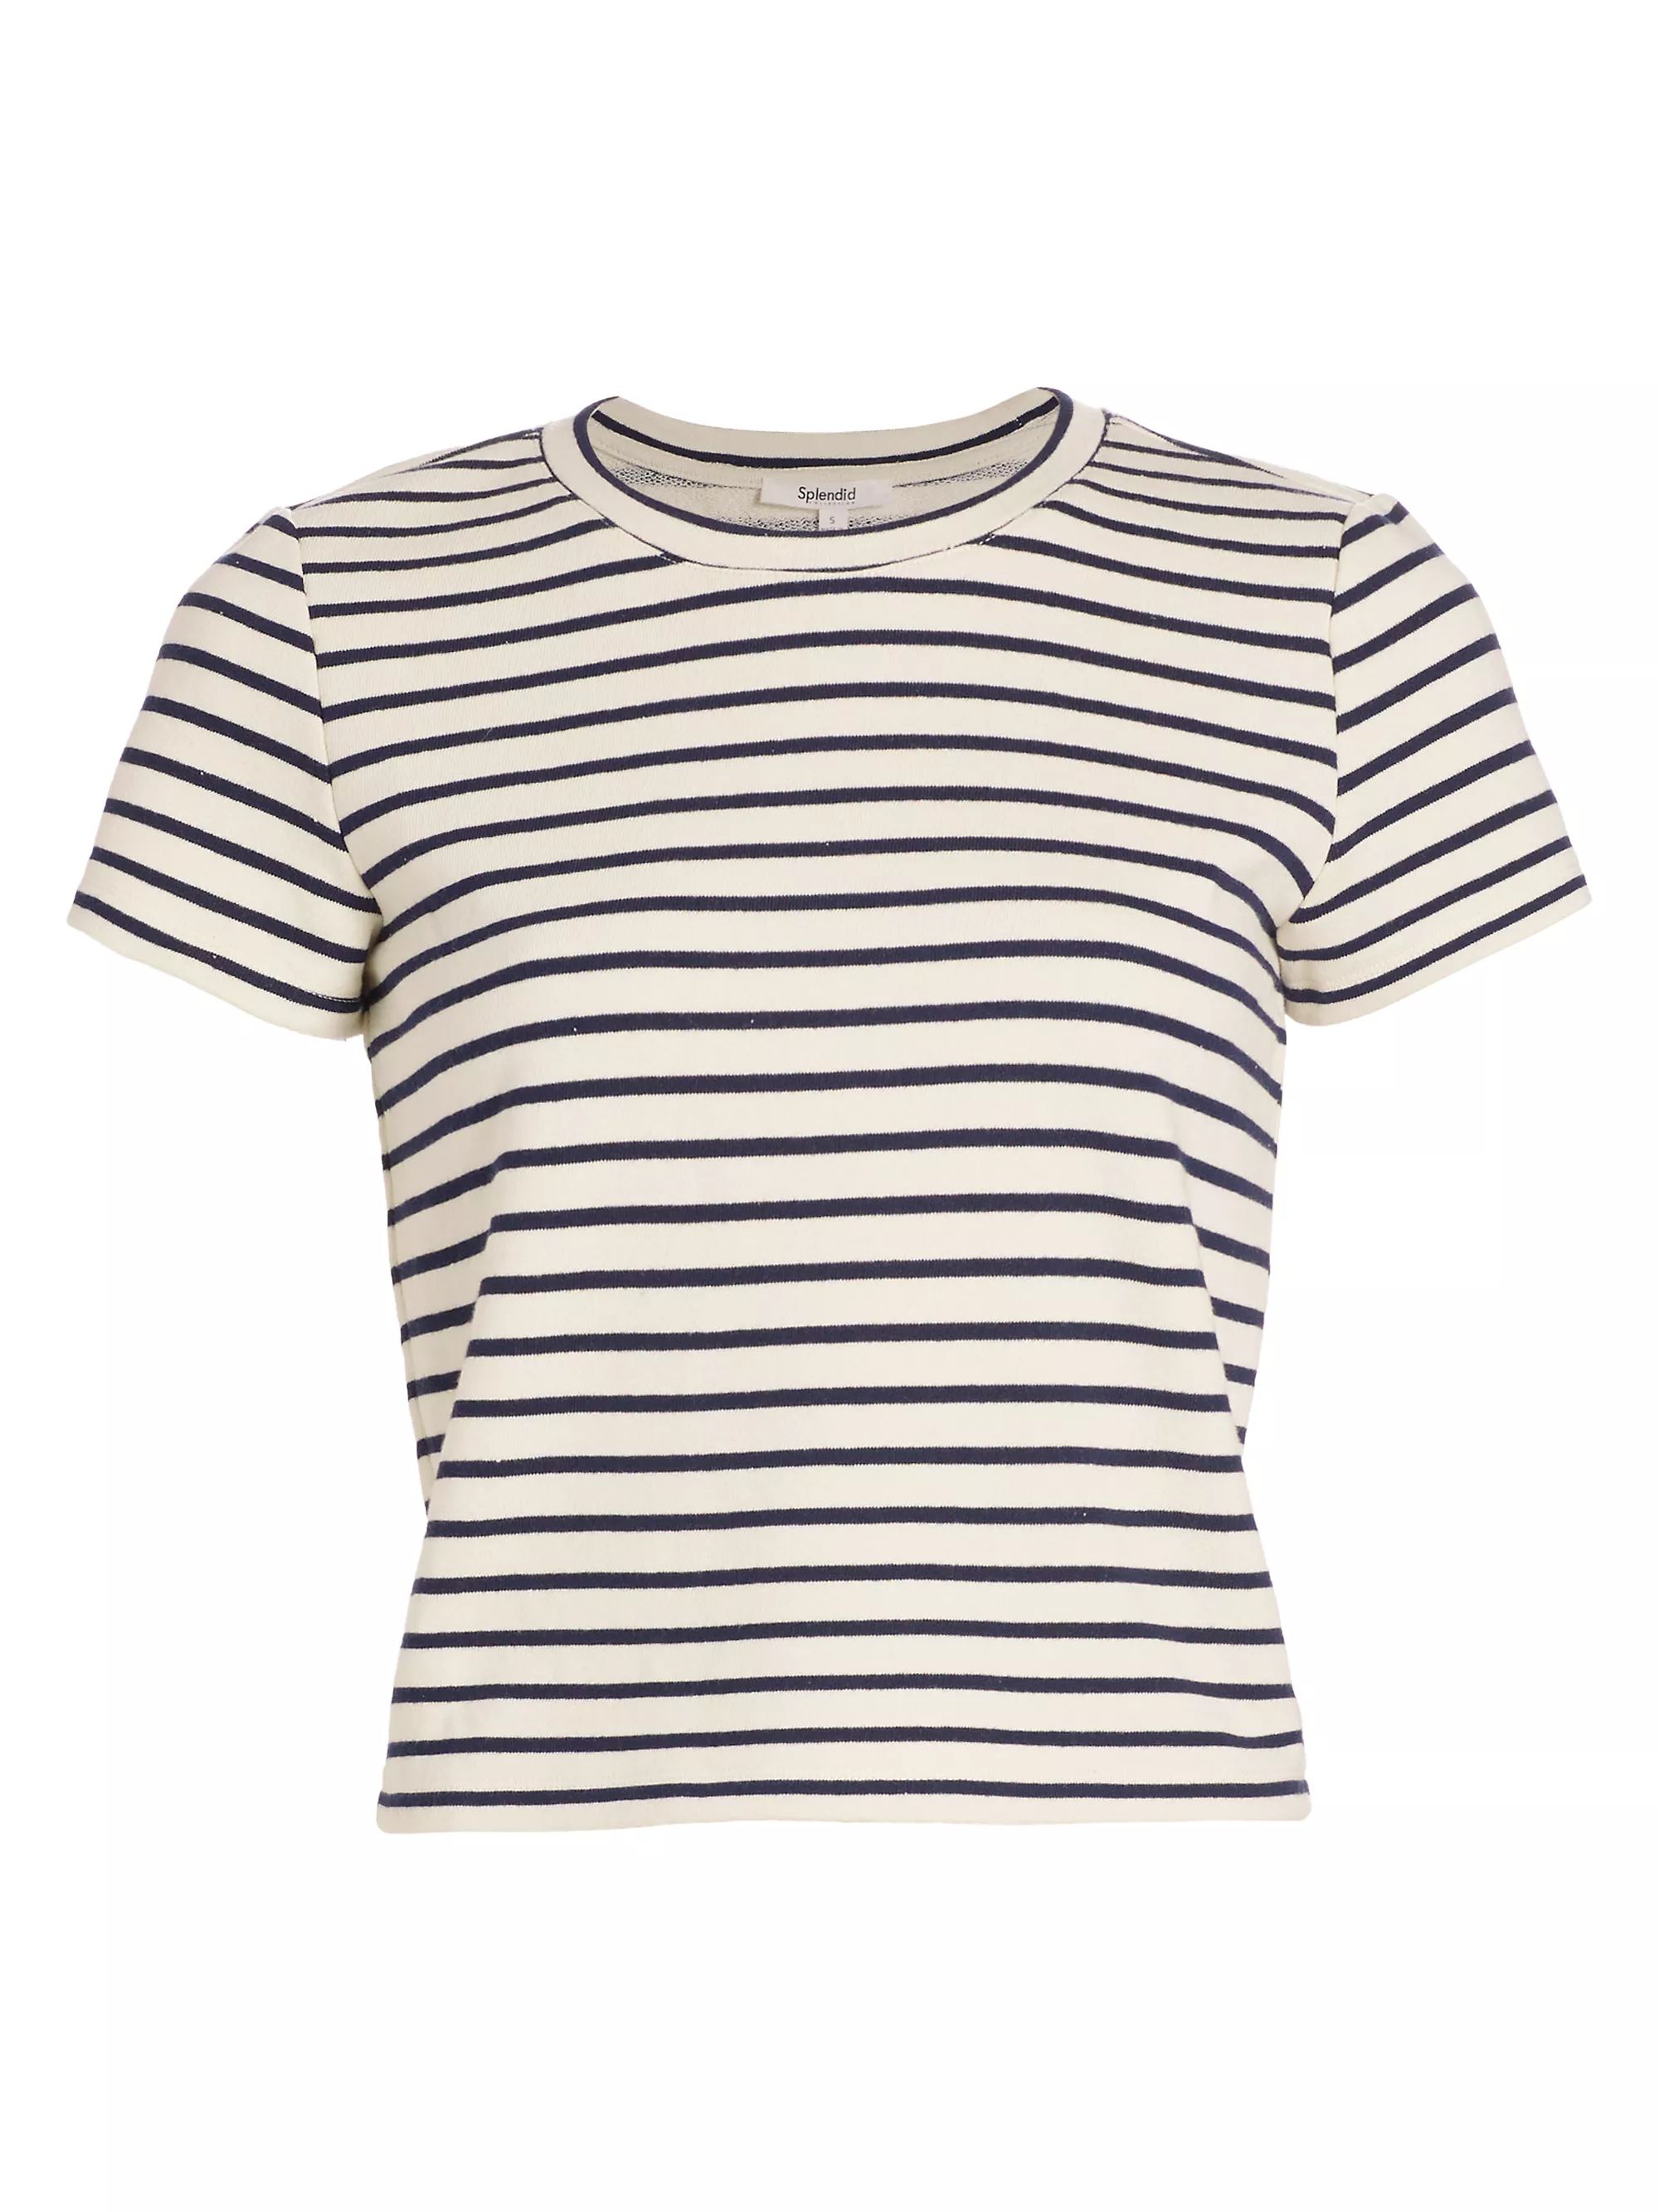 Whitney Striped Crop T-Shirt | Saks Fifth Avenue